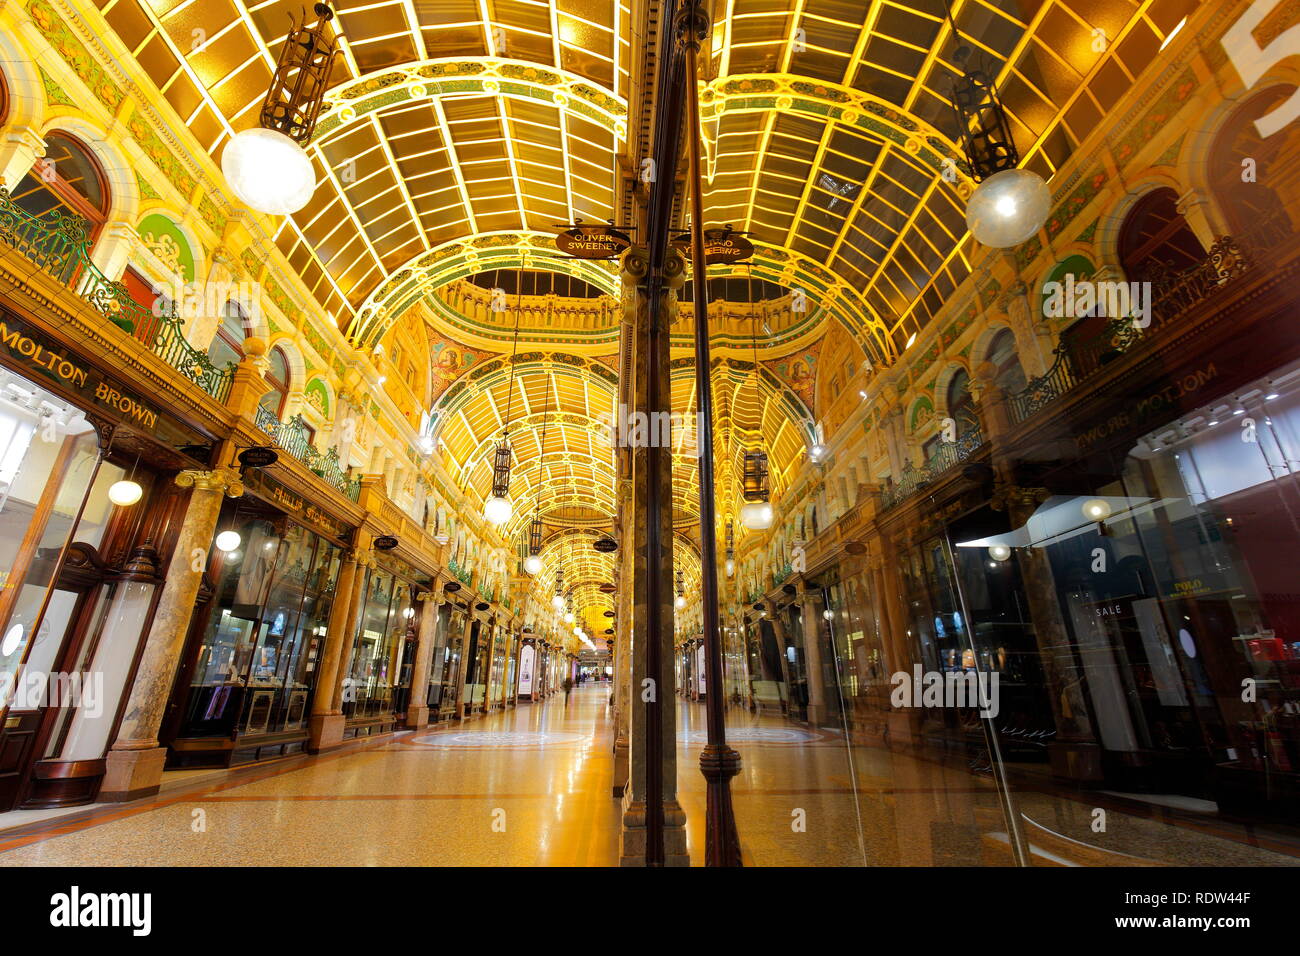 County Arcade is part of the Victoria Quarter Shopping Complex in Leeds. Stock Photo